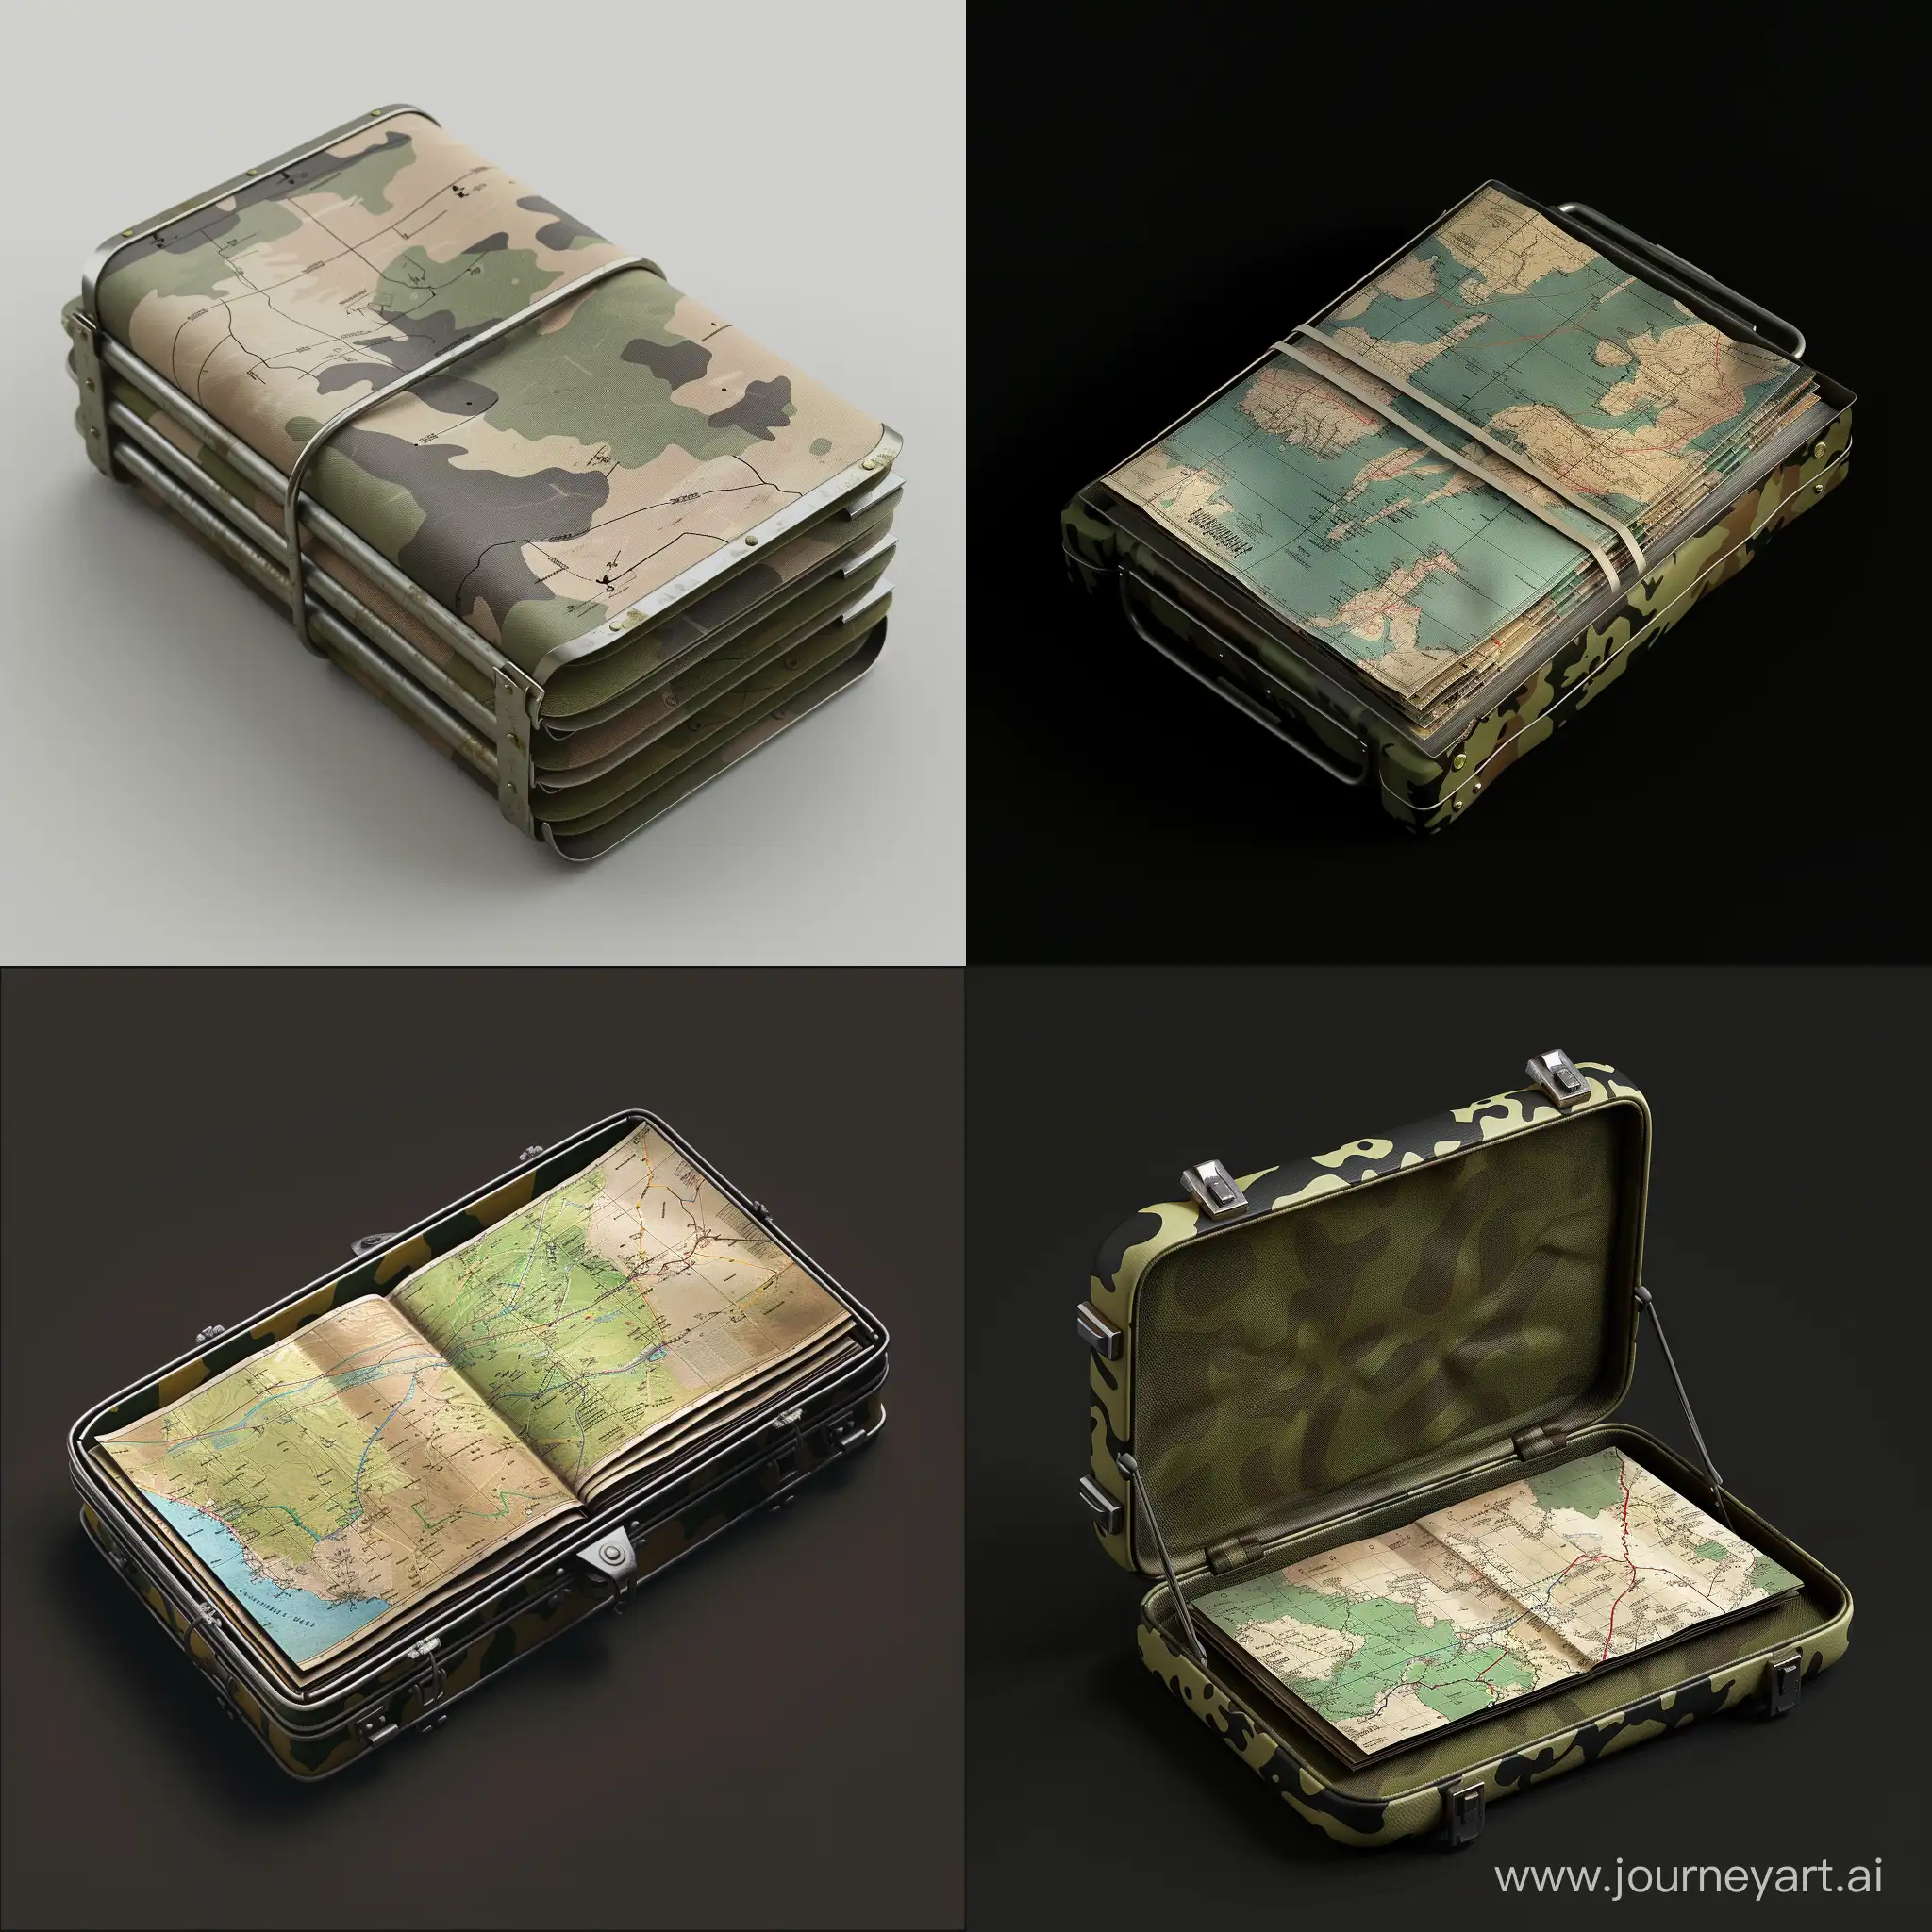 Isometric-Military-Mapping-Cartographic-Kit-Folded-Paper-in-Camo-Metal-Folder